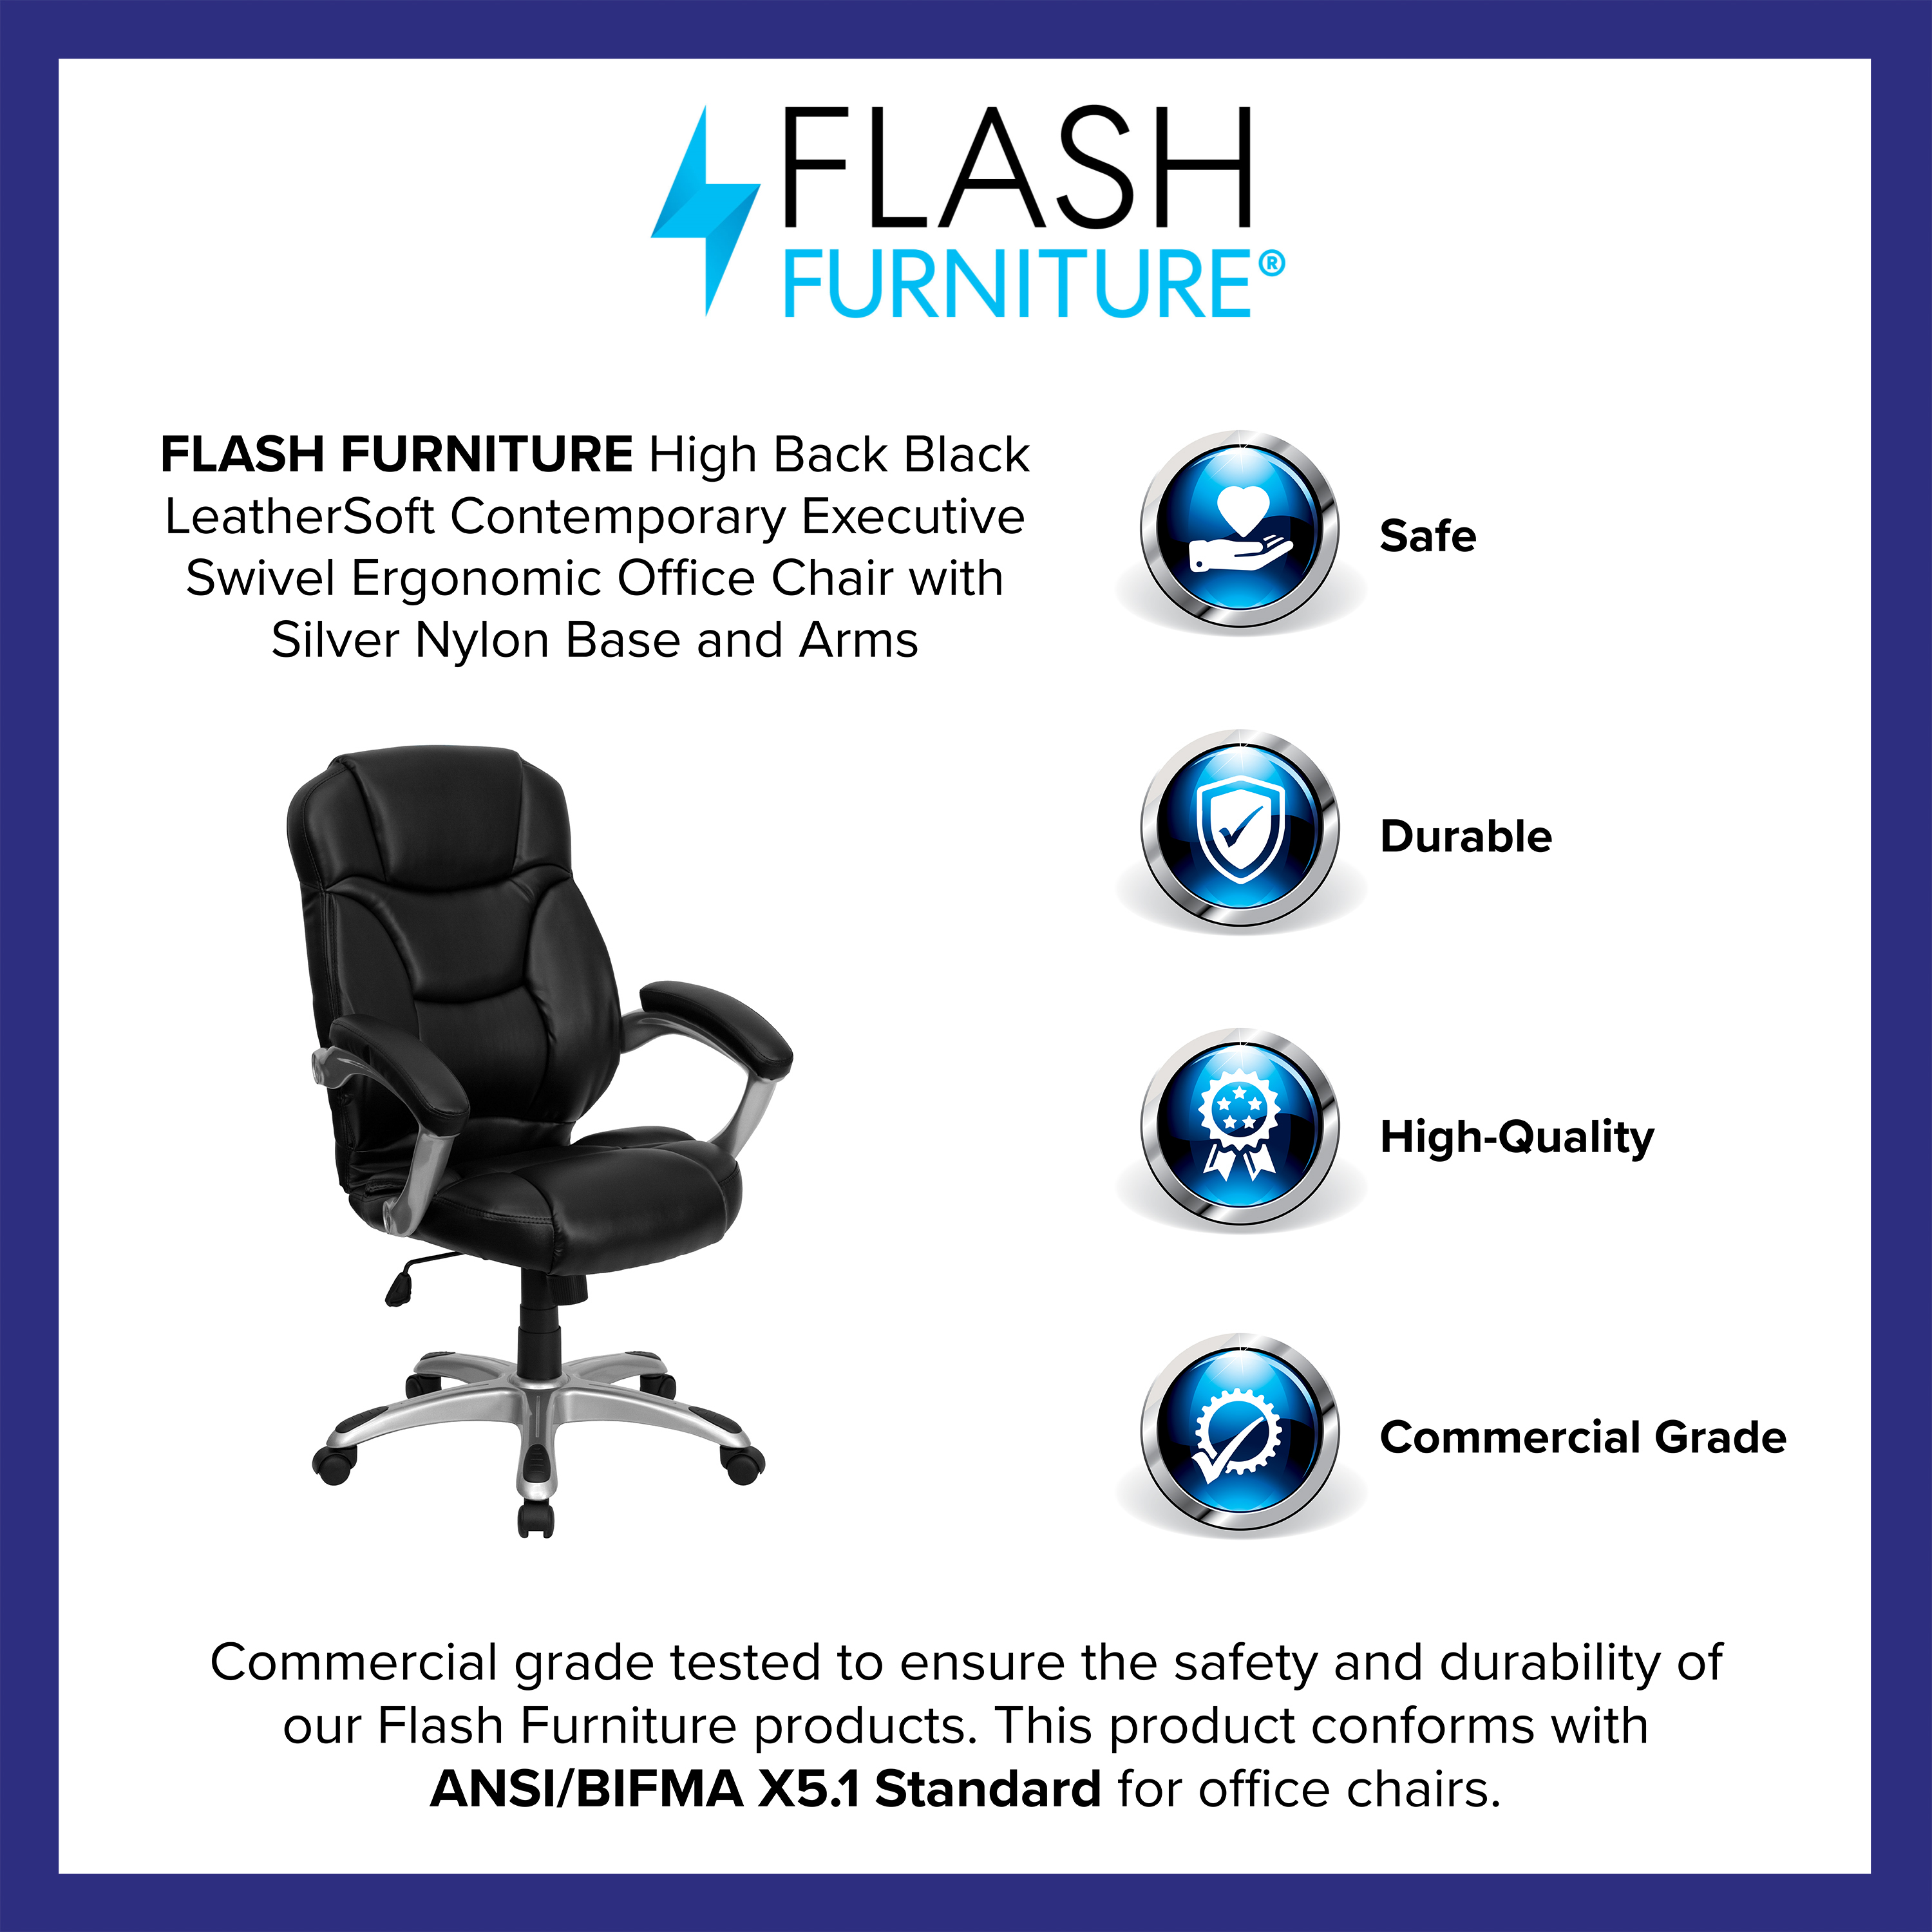 Flash Furniture High Back Black LeatherSoft Contemporary Executive Swivel Ergonomic Office Chair with Silver Nylon Base and Arms - image 3 of 6